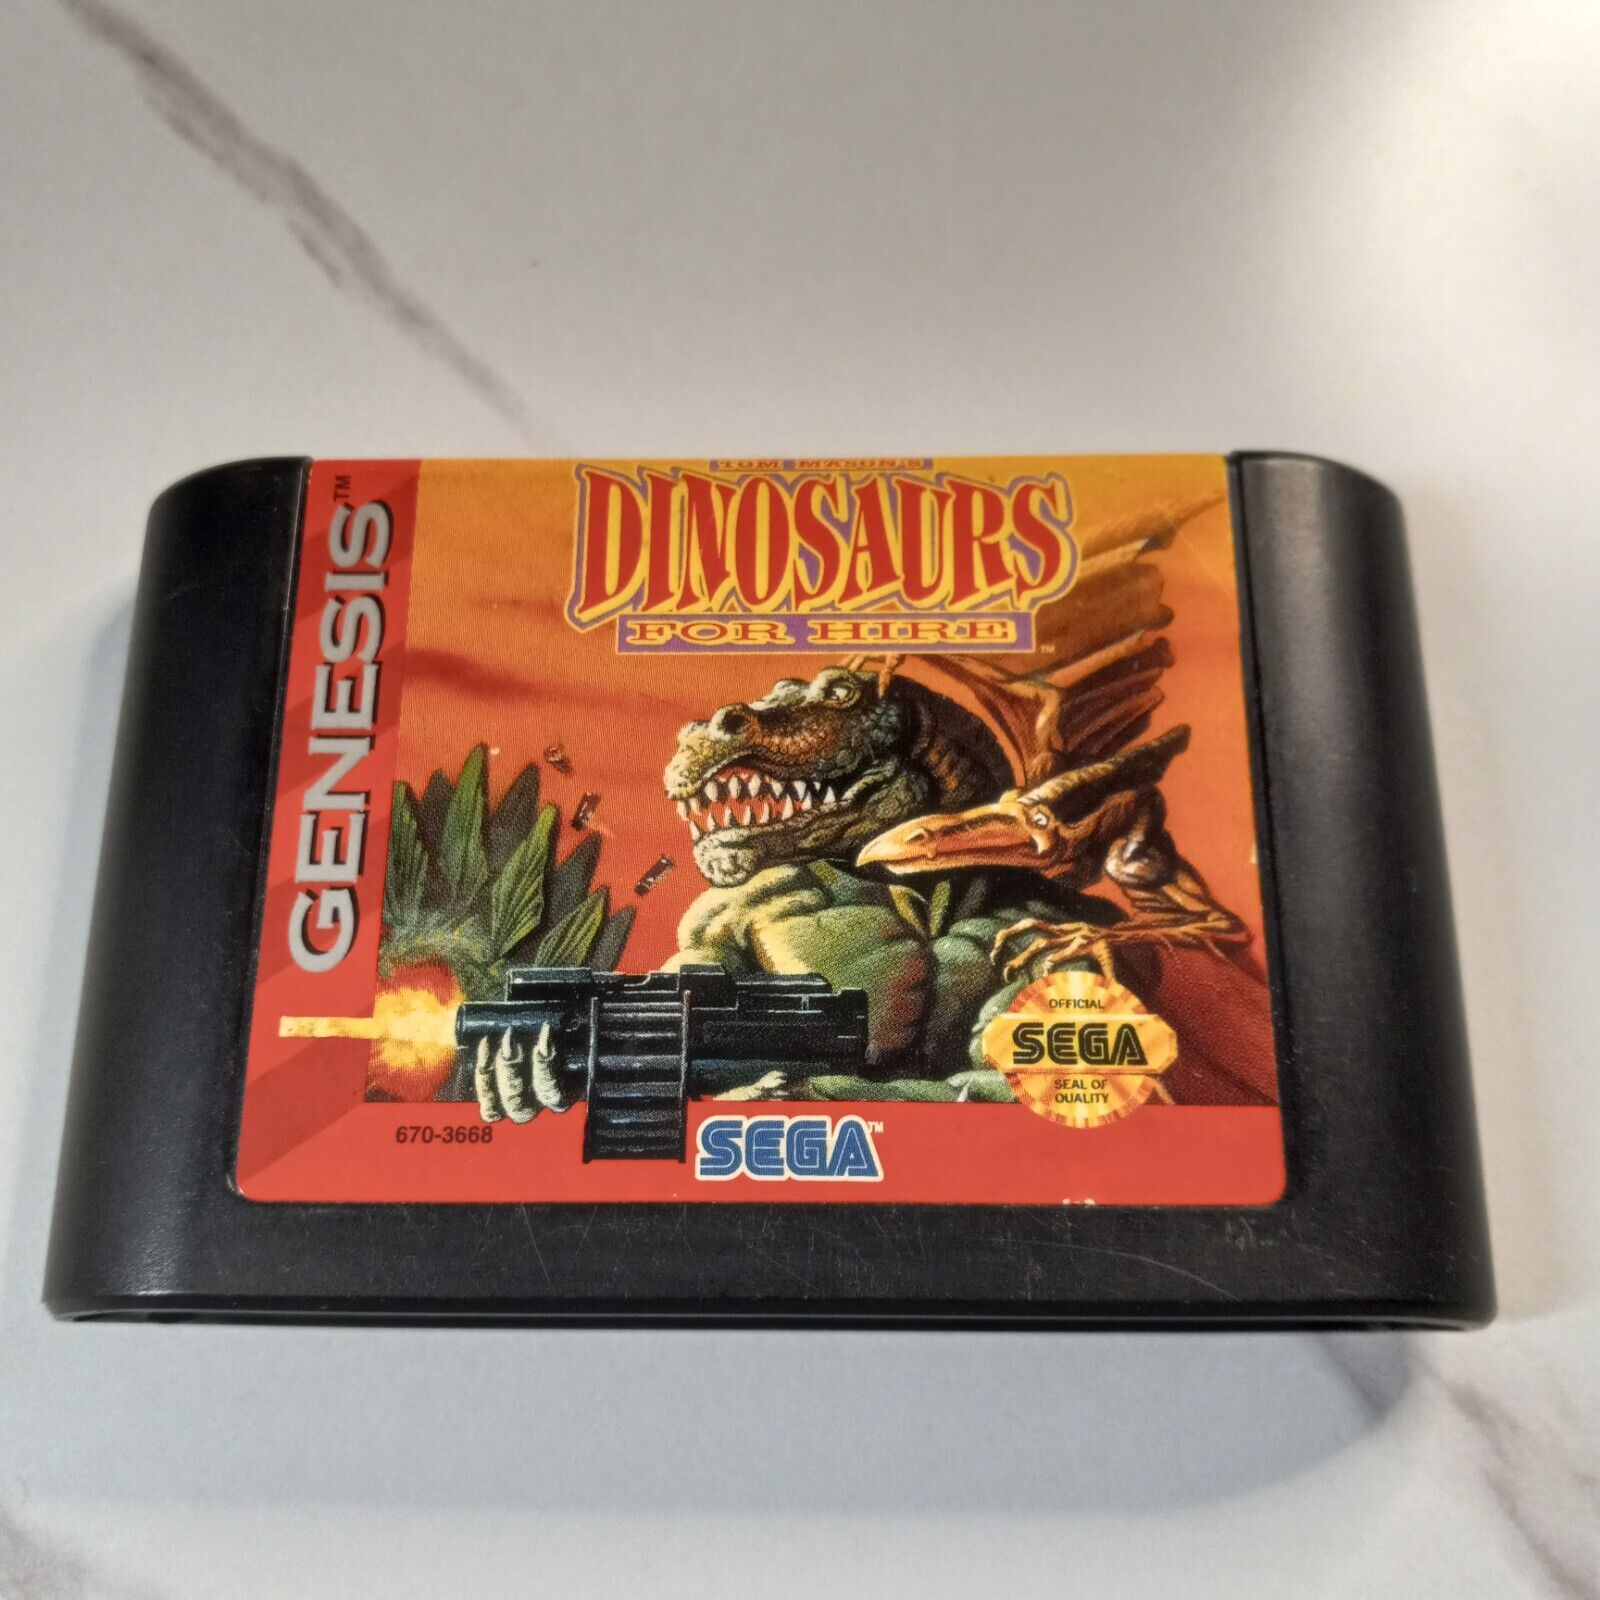 Dinosaurs for Hire cartridge (Sega Genesis, 1993) TESTED AND WORKING 